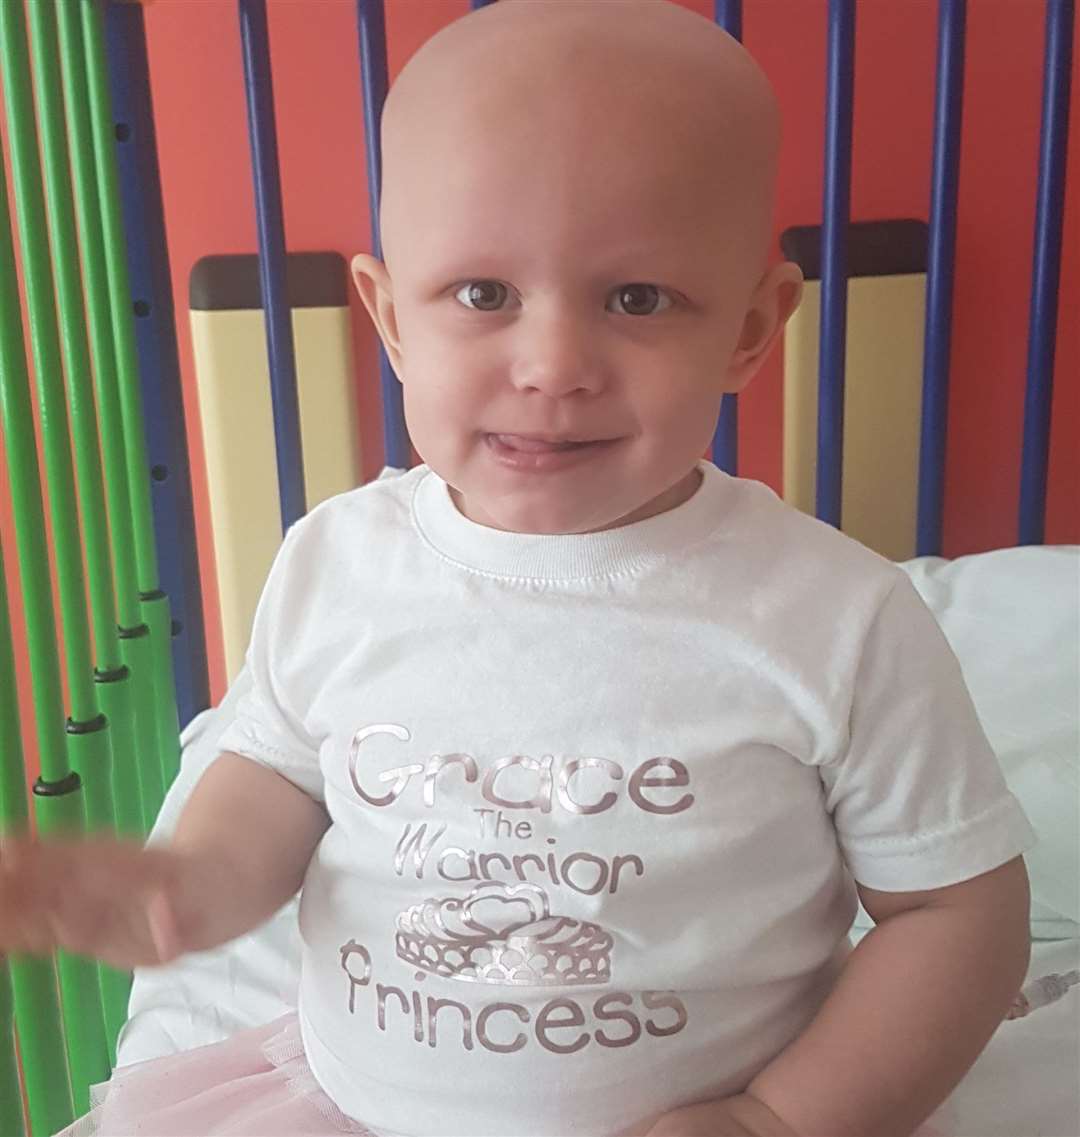 Grace was diagnosed at just nine months old